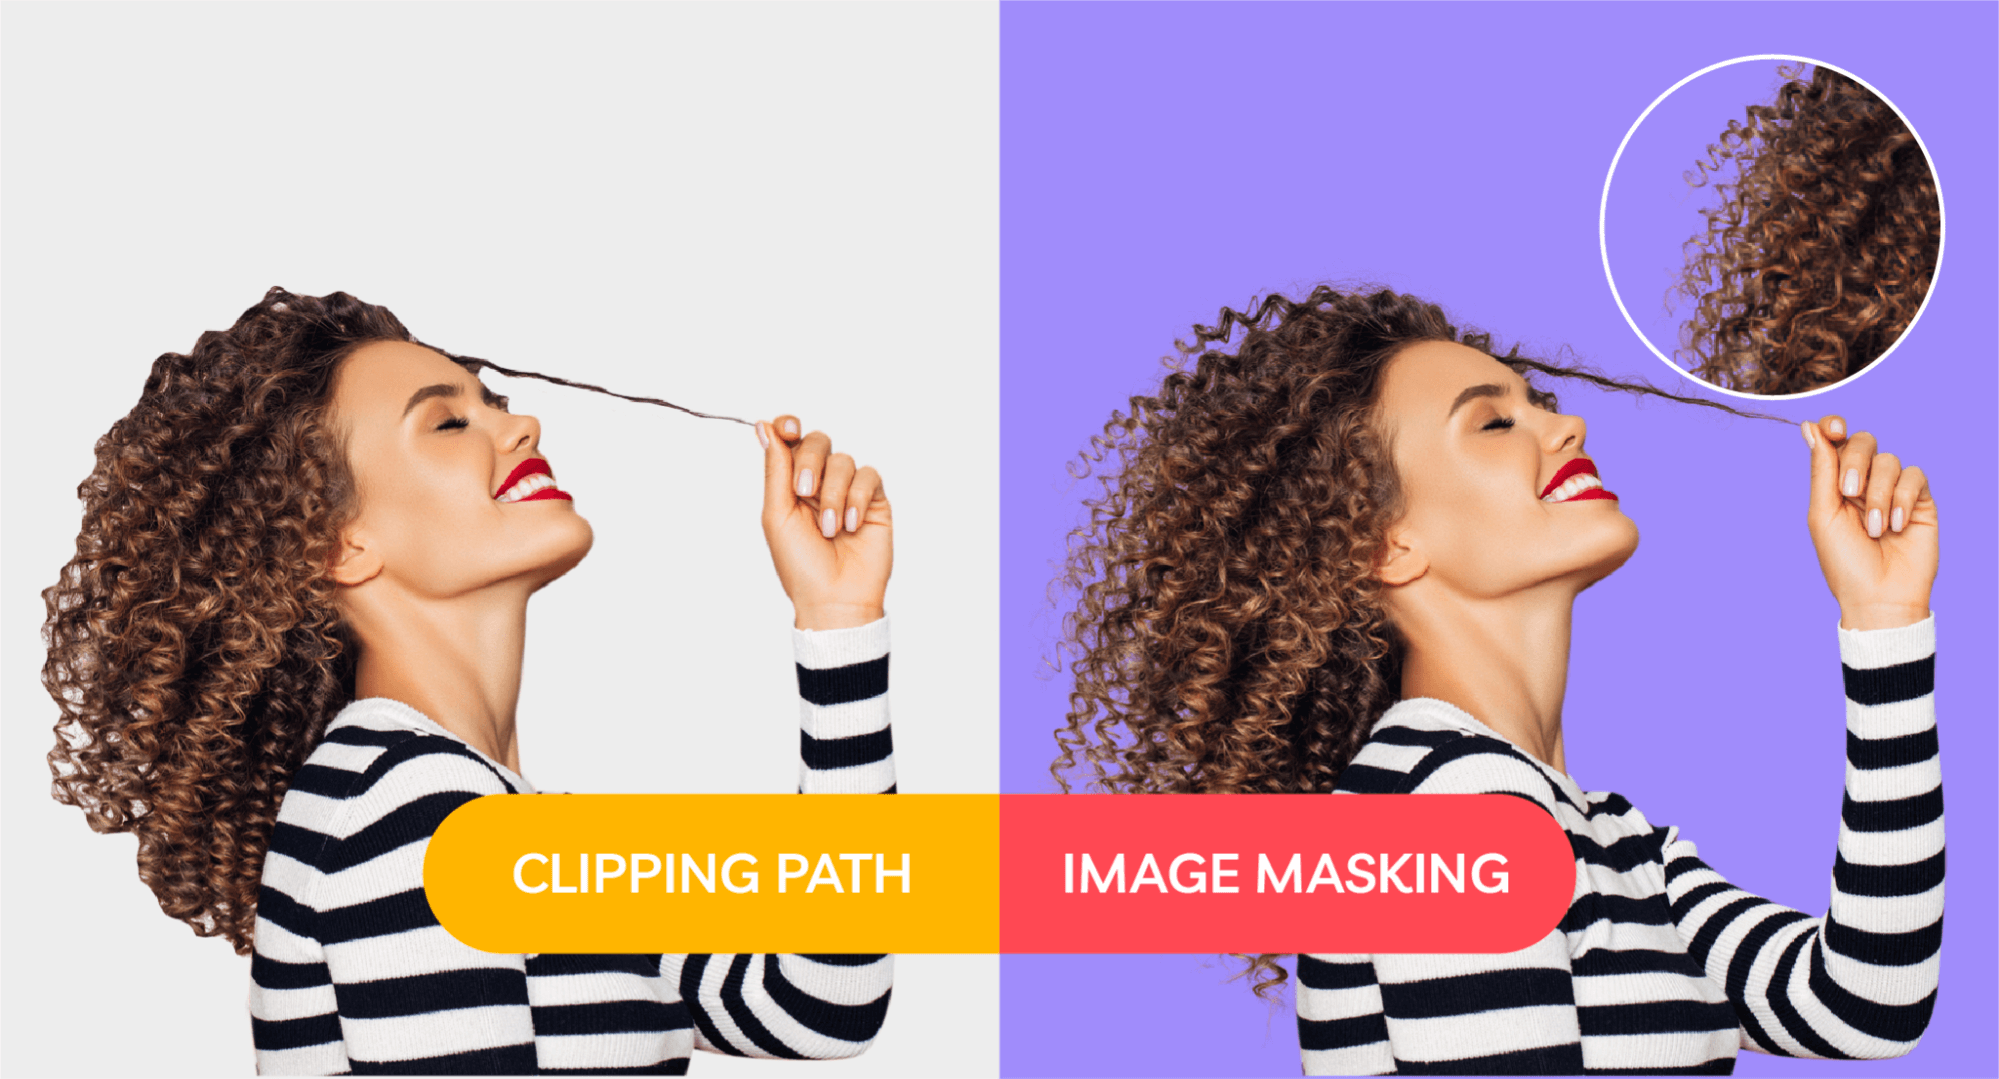 clipping vs masking.png